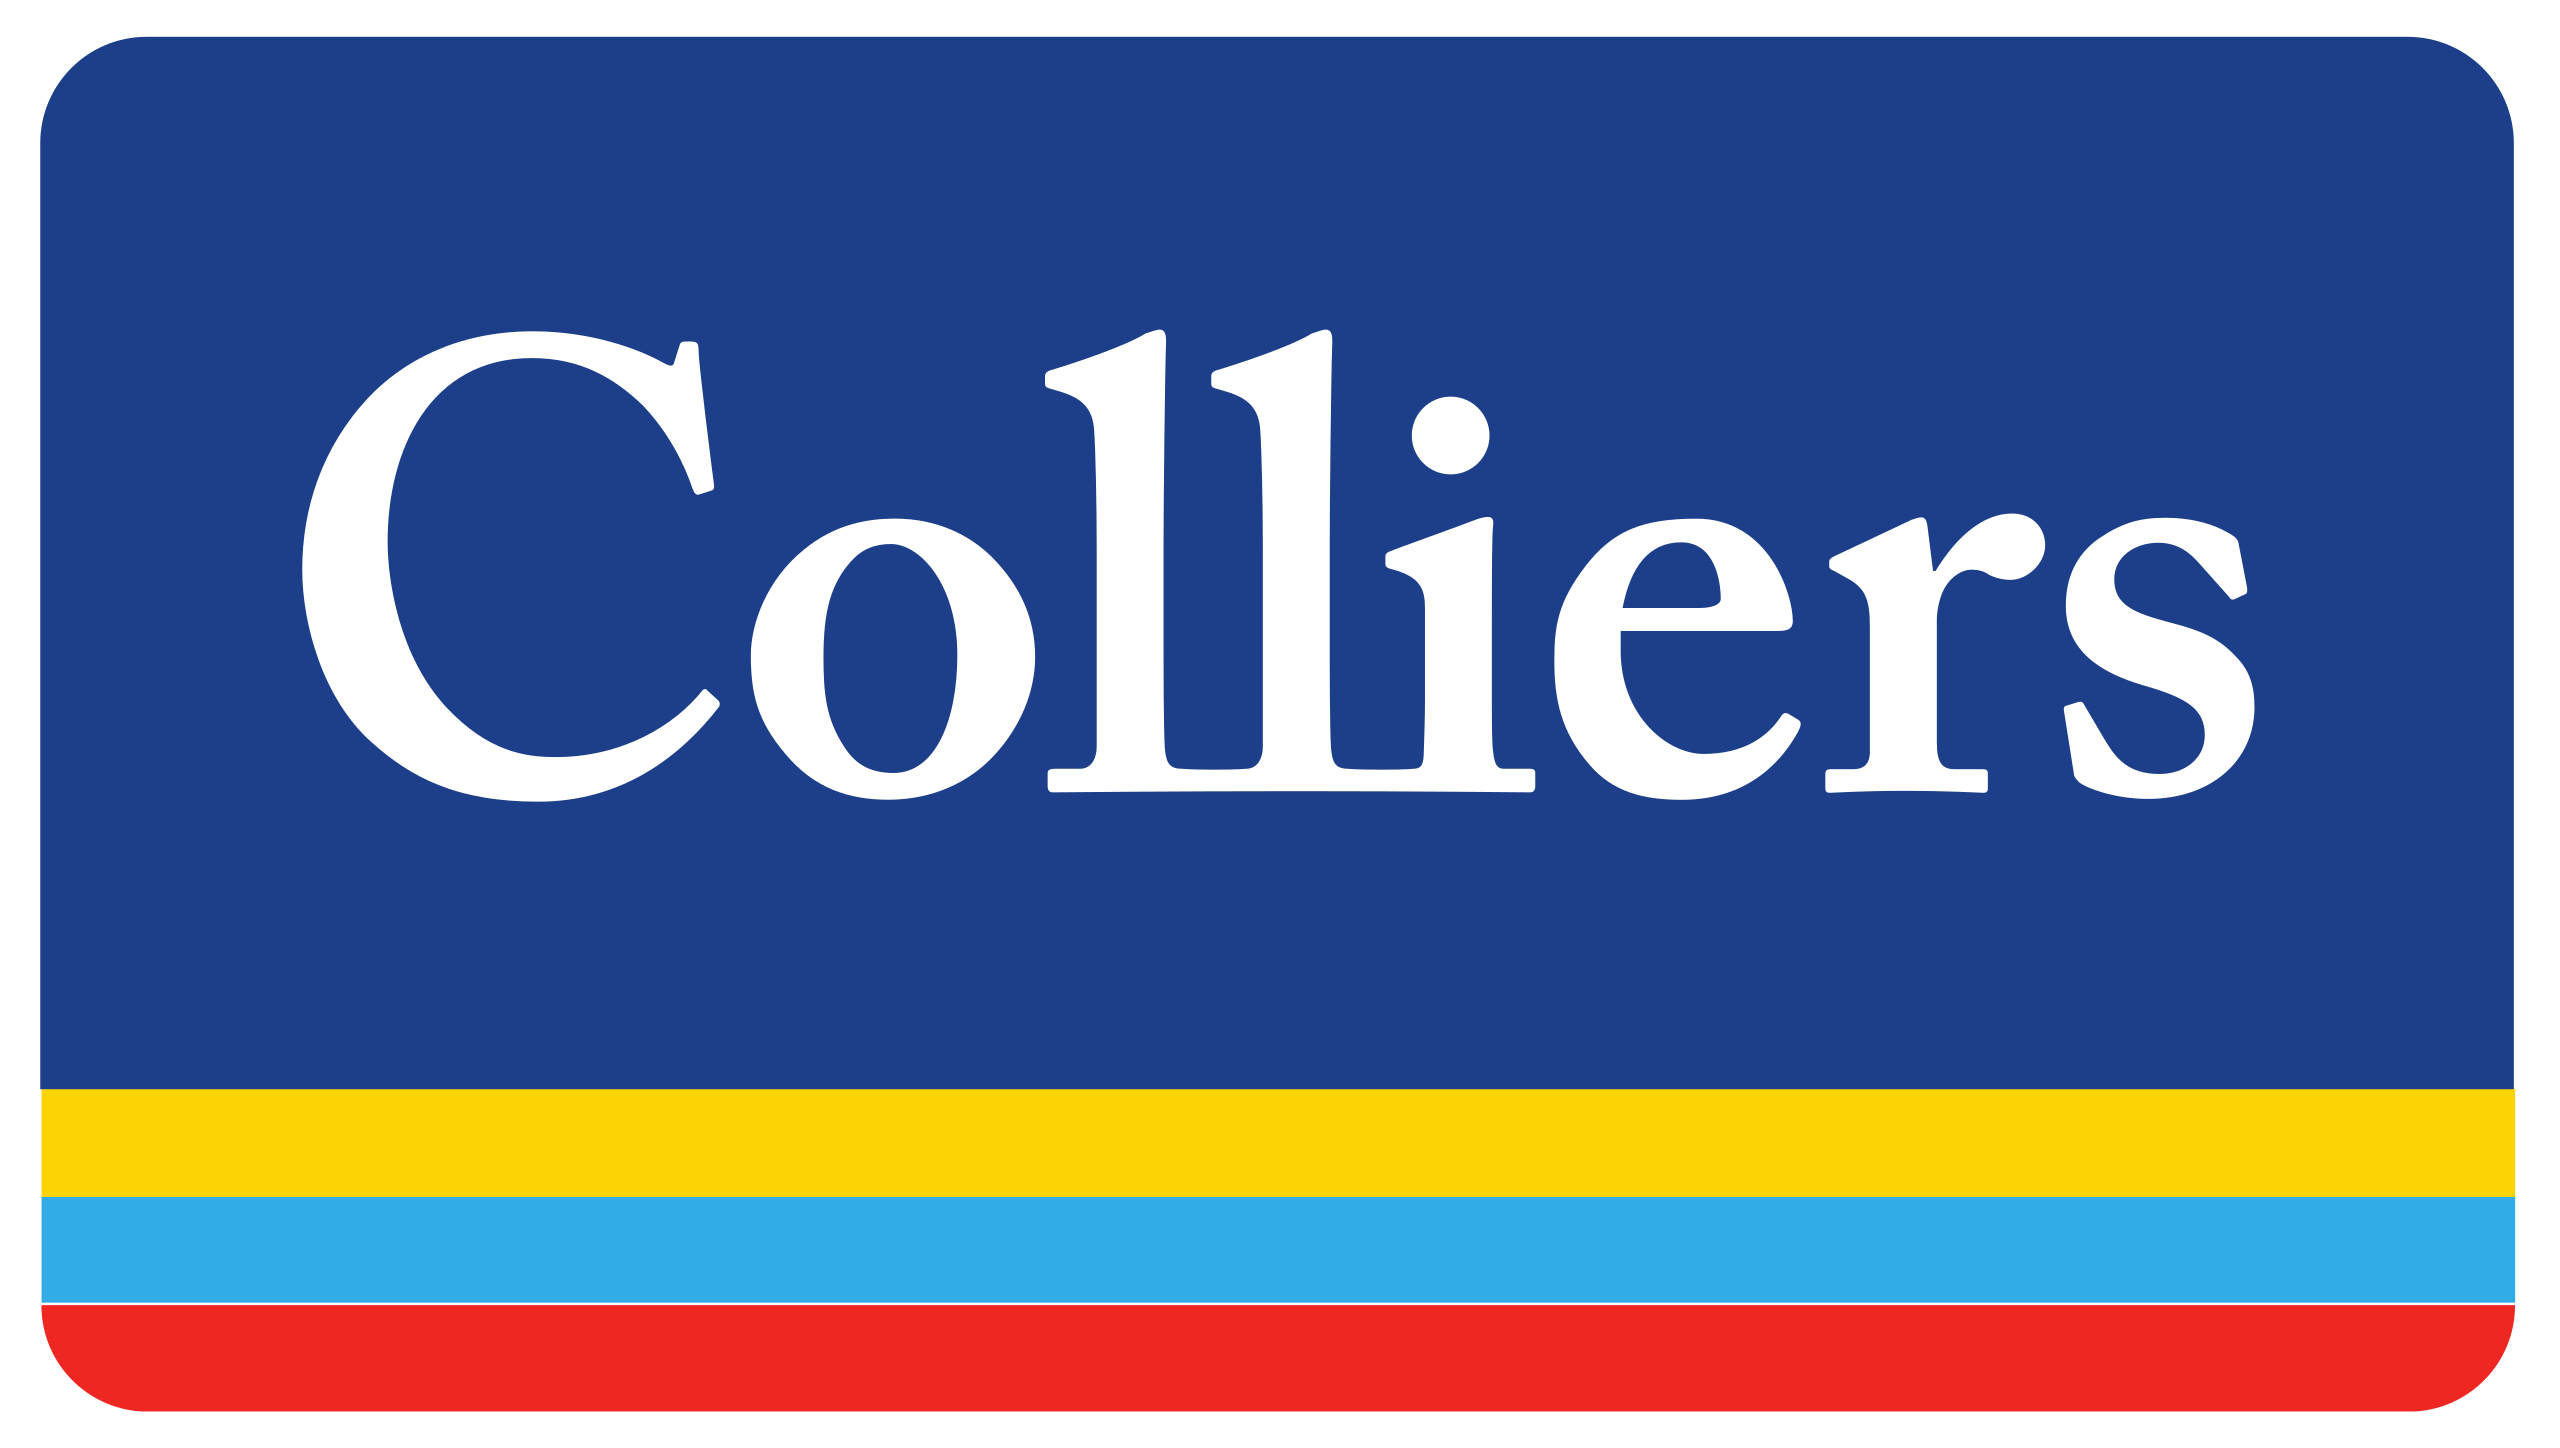 Colliers.png